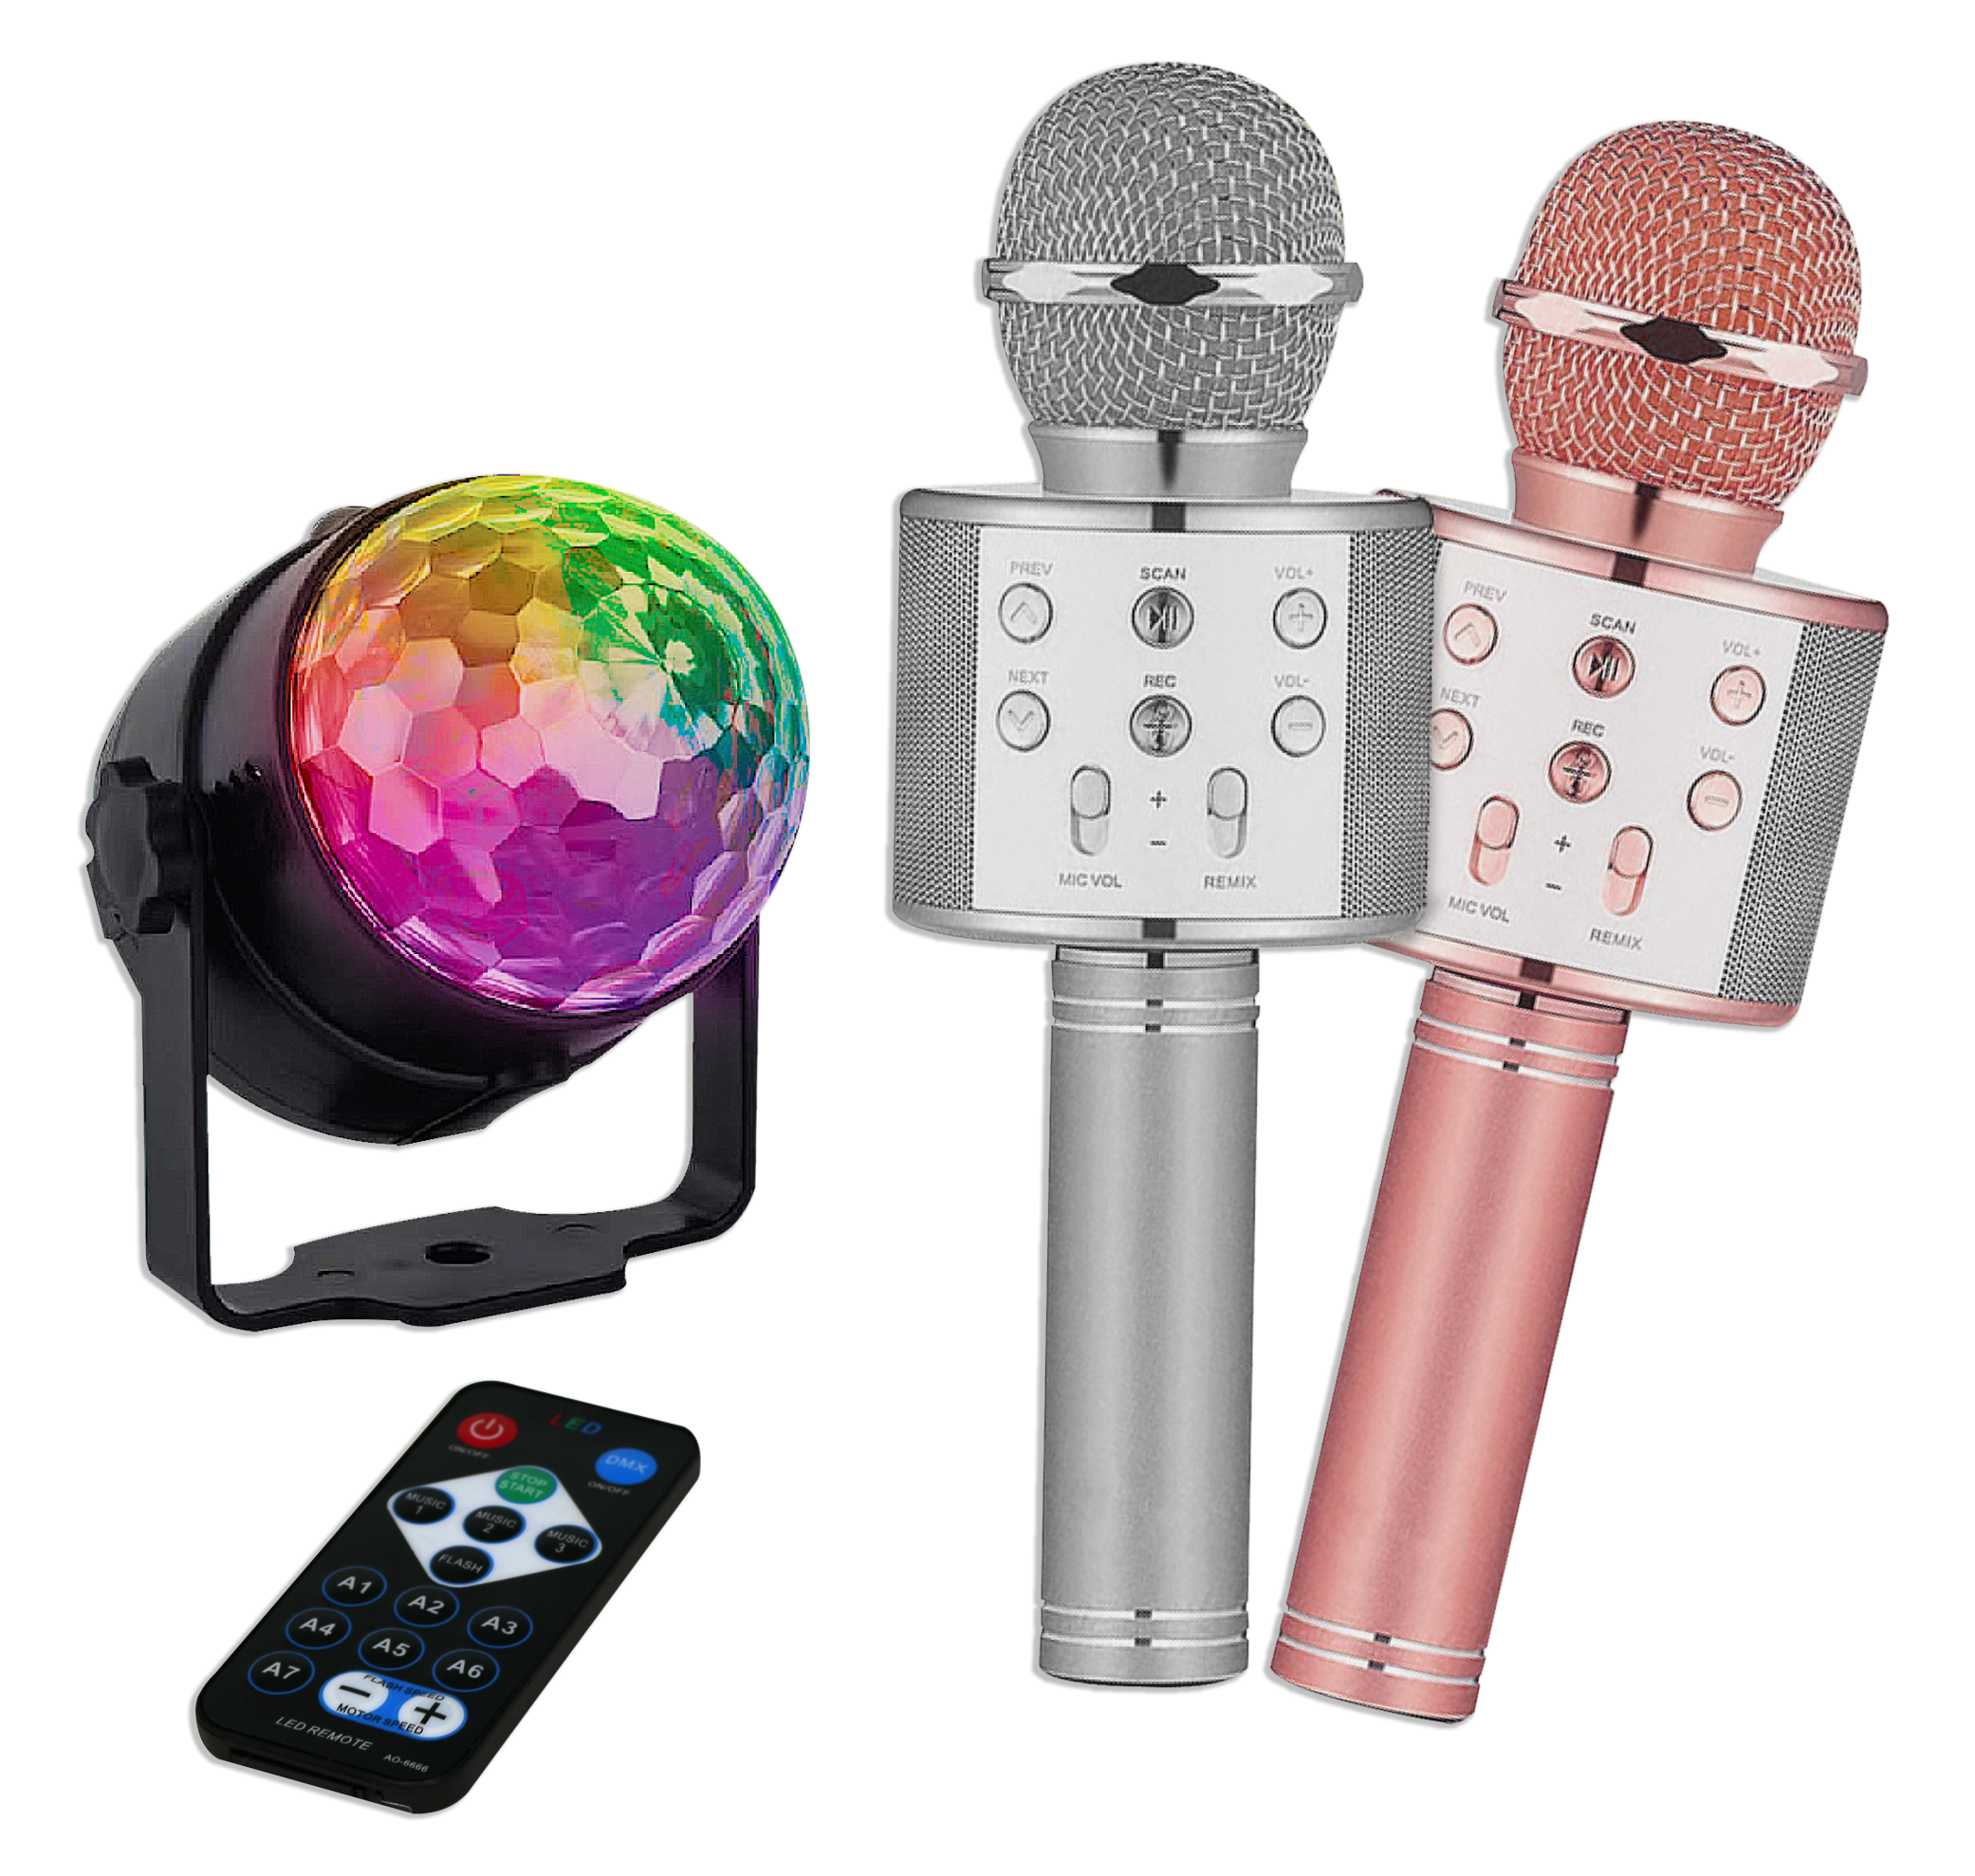 GabbaGoods Karaoke 3 Piece Set Disco LED Lights Projector and 2 Microphones That SYNC Together, Sound Activated Party Lights with Remote Control, RGB Disco Ball